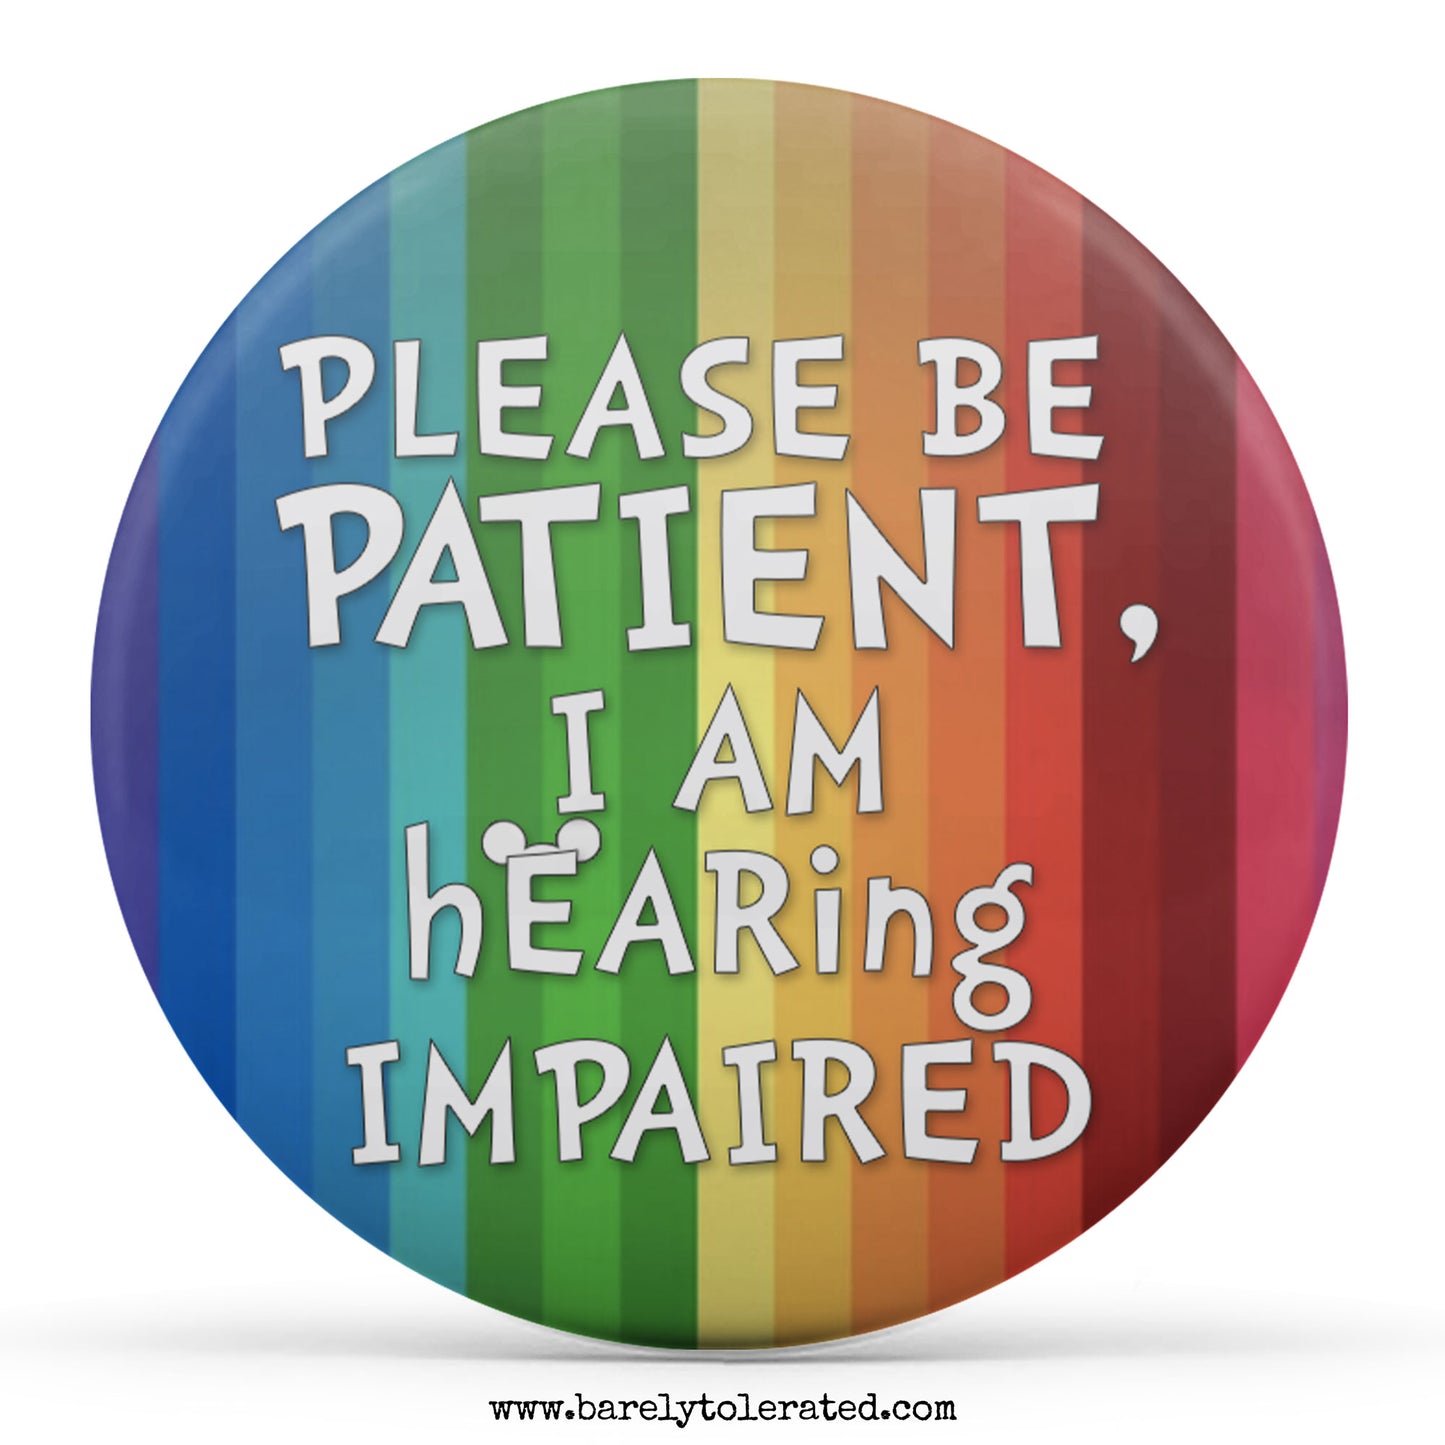 Please Be Patient, I am Hearing Impaired